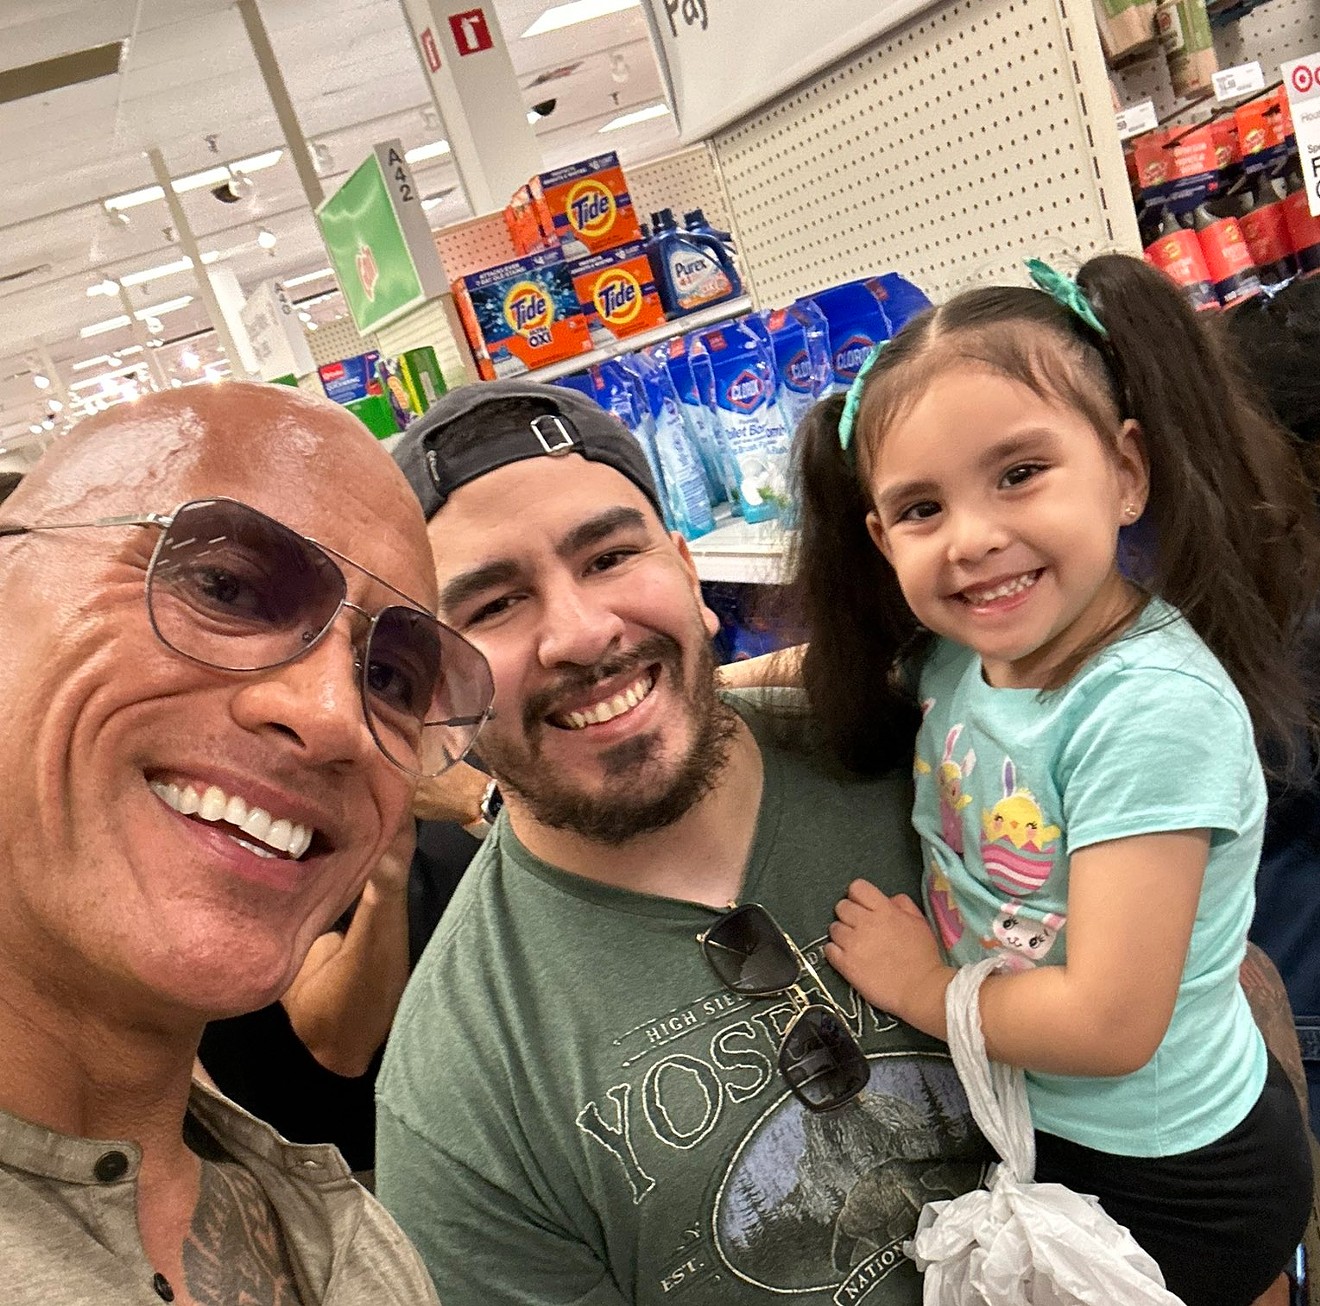 The Rock (left) took a selfie with Ruben Rodriguez (middle) and his daughter before they made friends on X.